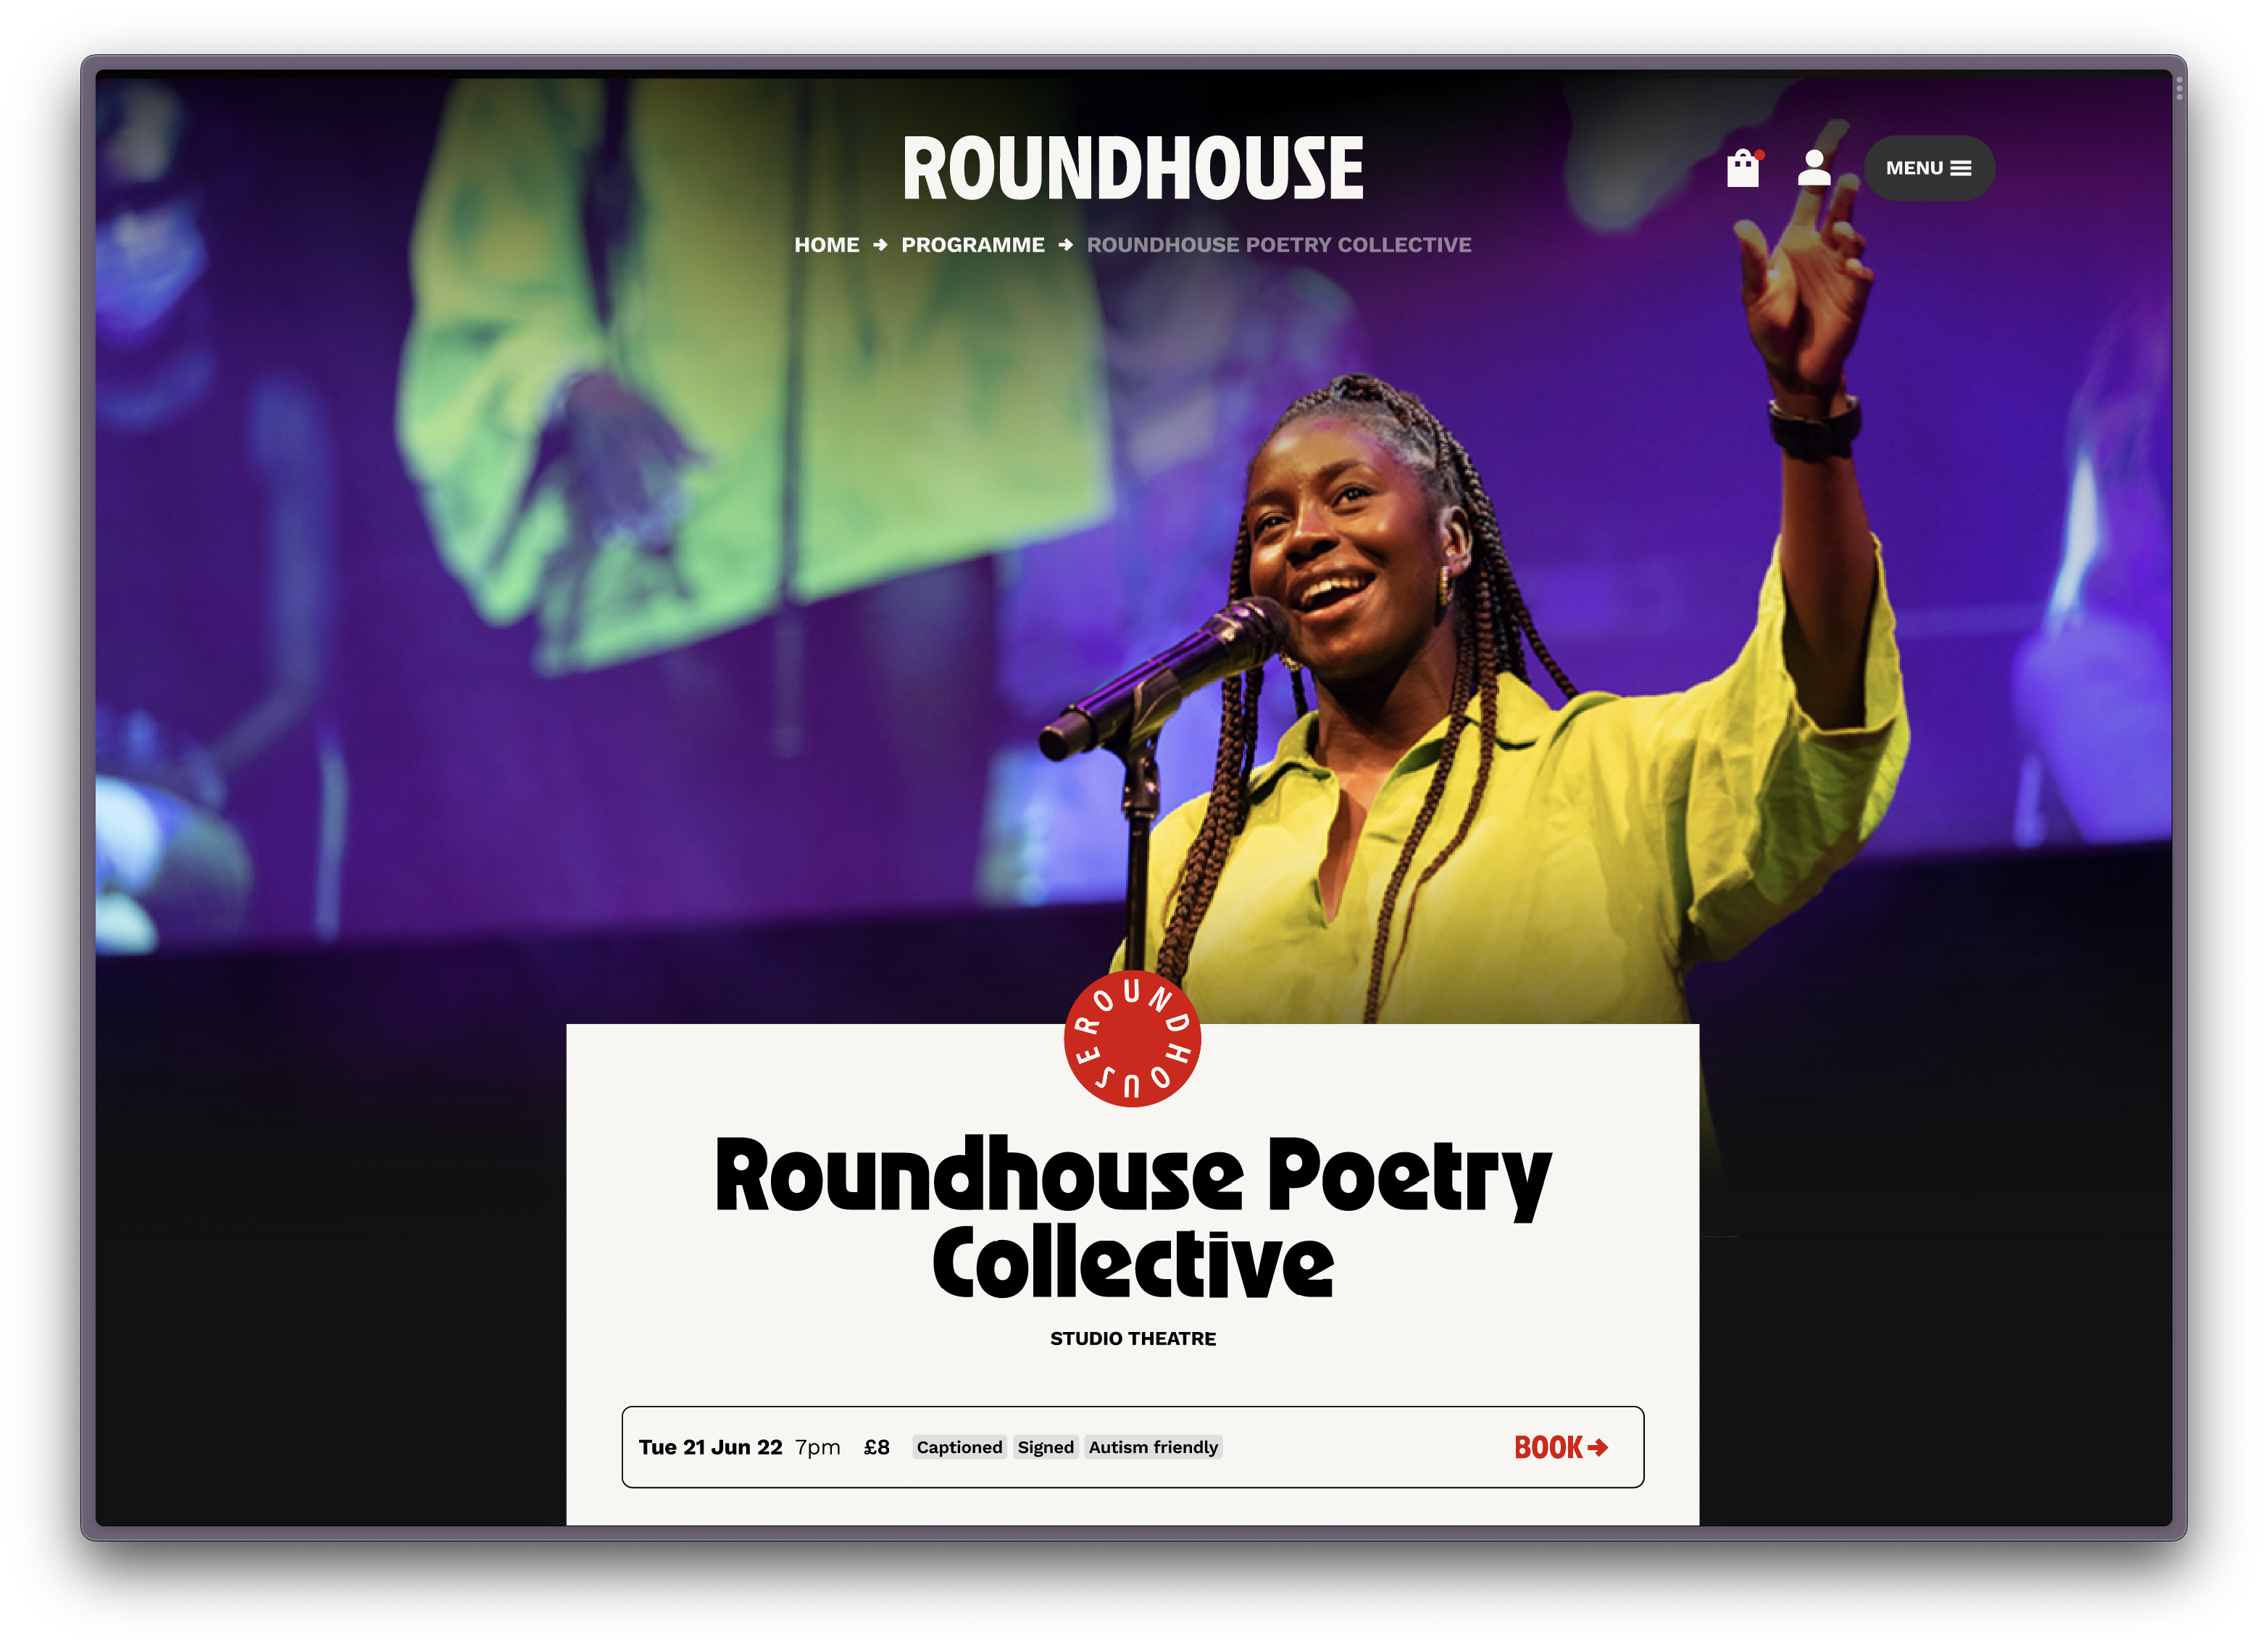 Screenshot of a Roundhouse single event page, for an event called Roundhouse Poetry Collective. The full bleed hero image blends into the background, and the main event information is displayed prominently in the centre of theh page.